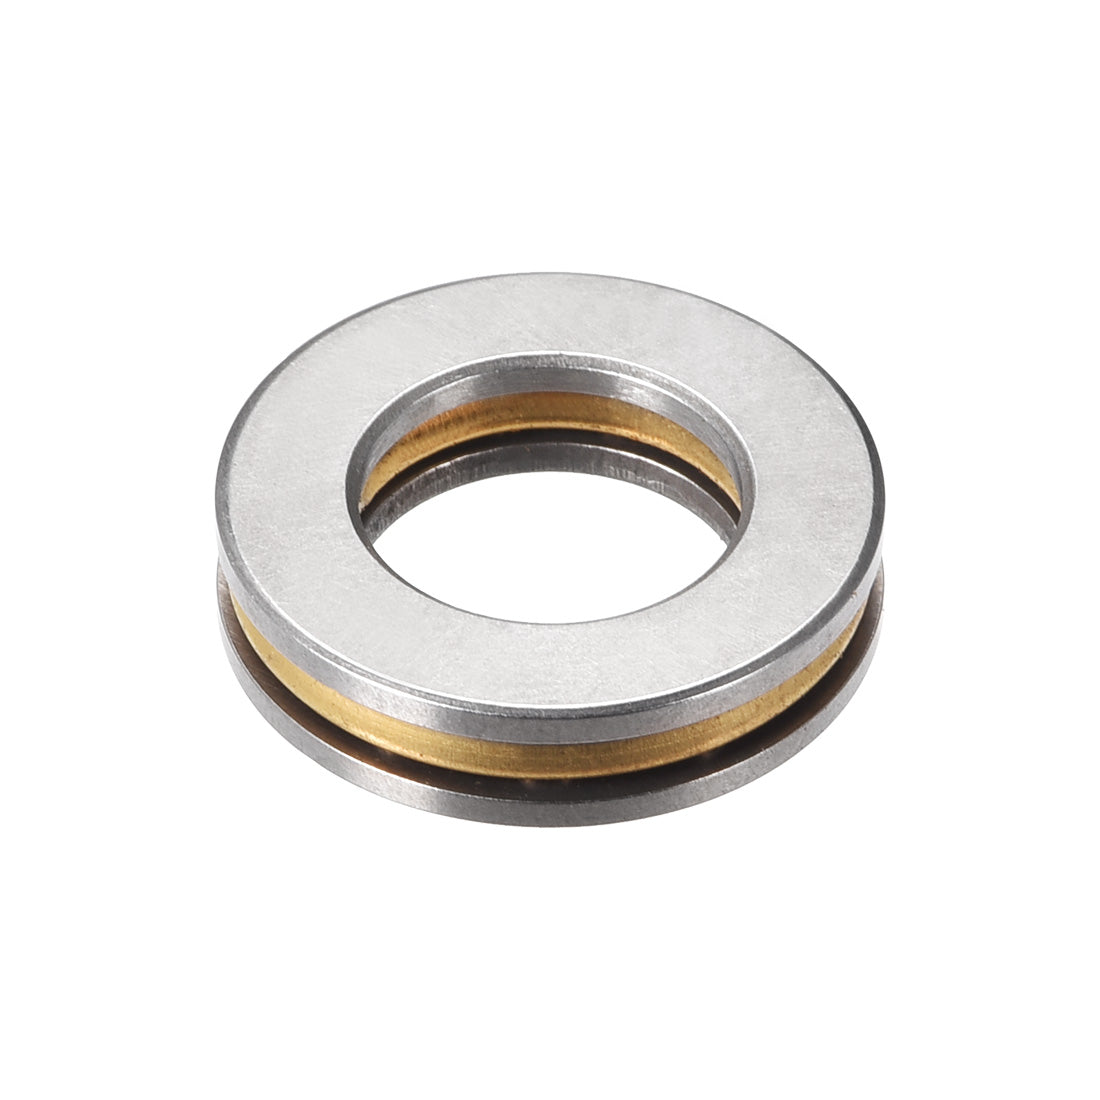 uxcell Uxcell F12-21M Miniature Thrust Ball Bearings 12x21x5mm Chrome Steel with Washers 2 Pcs